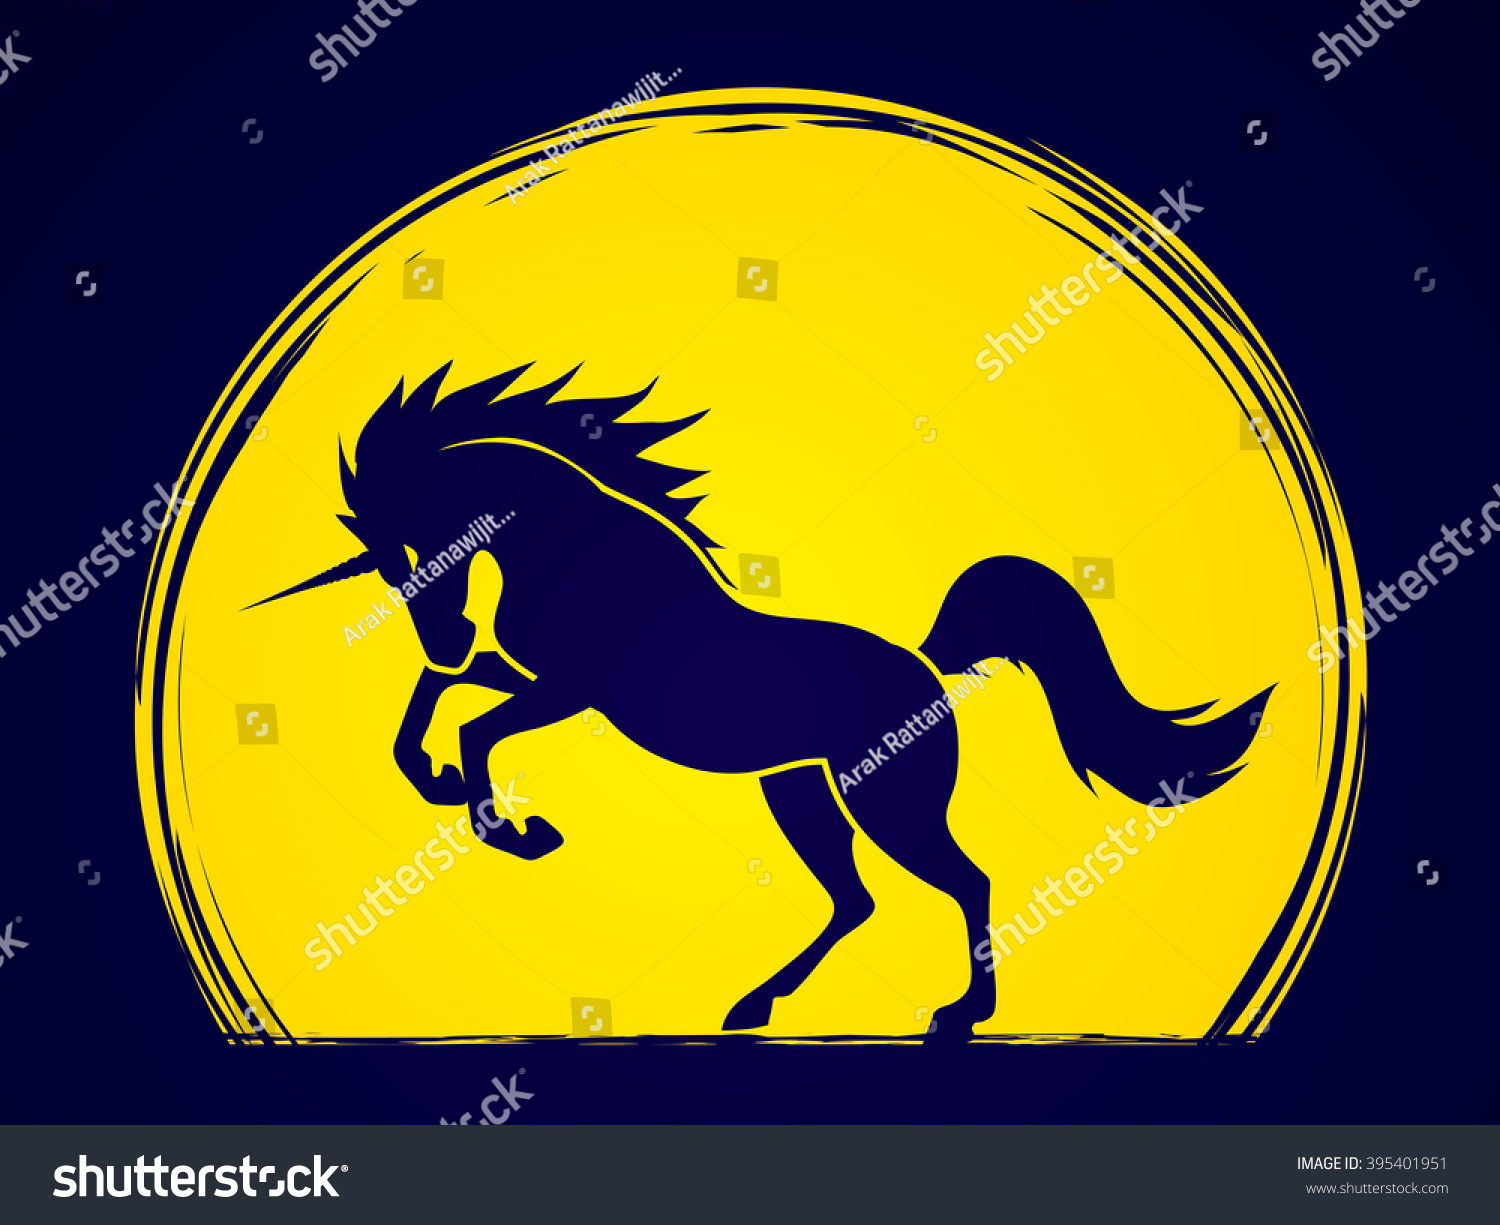 SVG of Unicorn silhouette designed on moonlight background graphic vector. svg